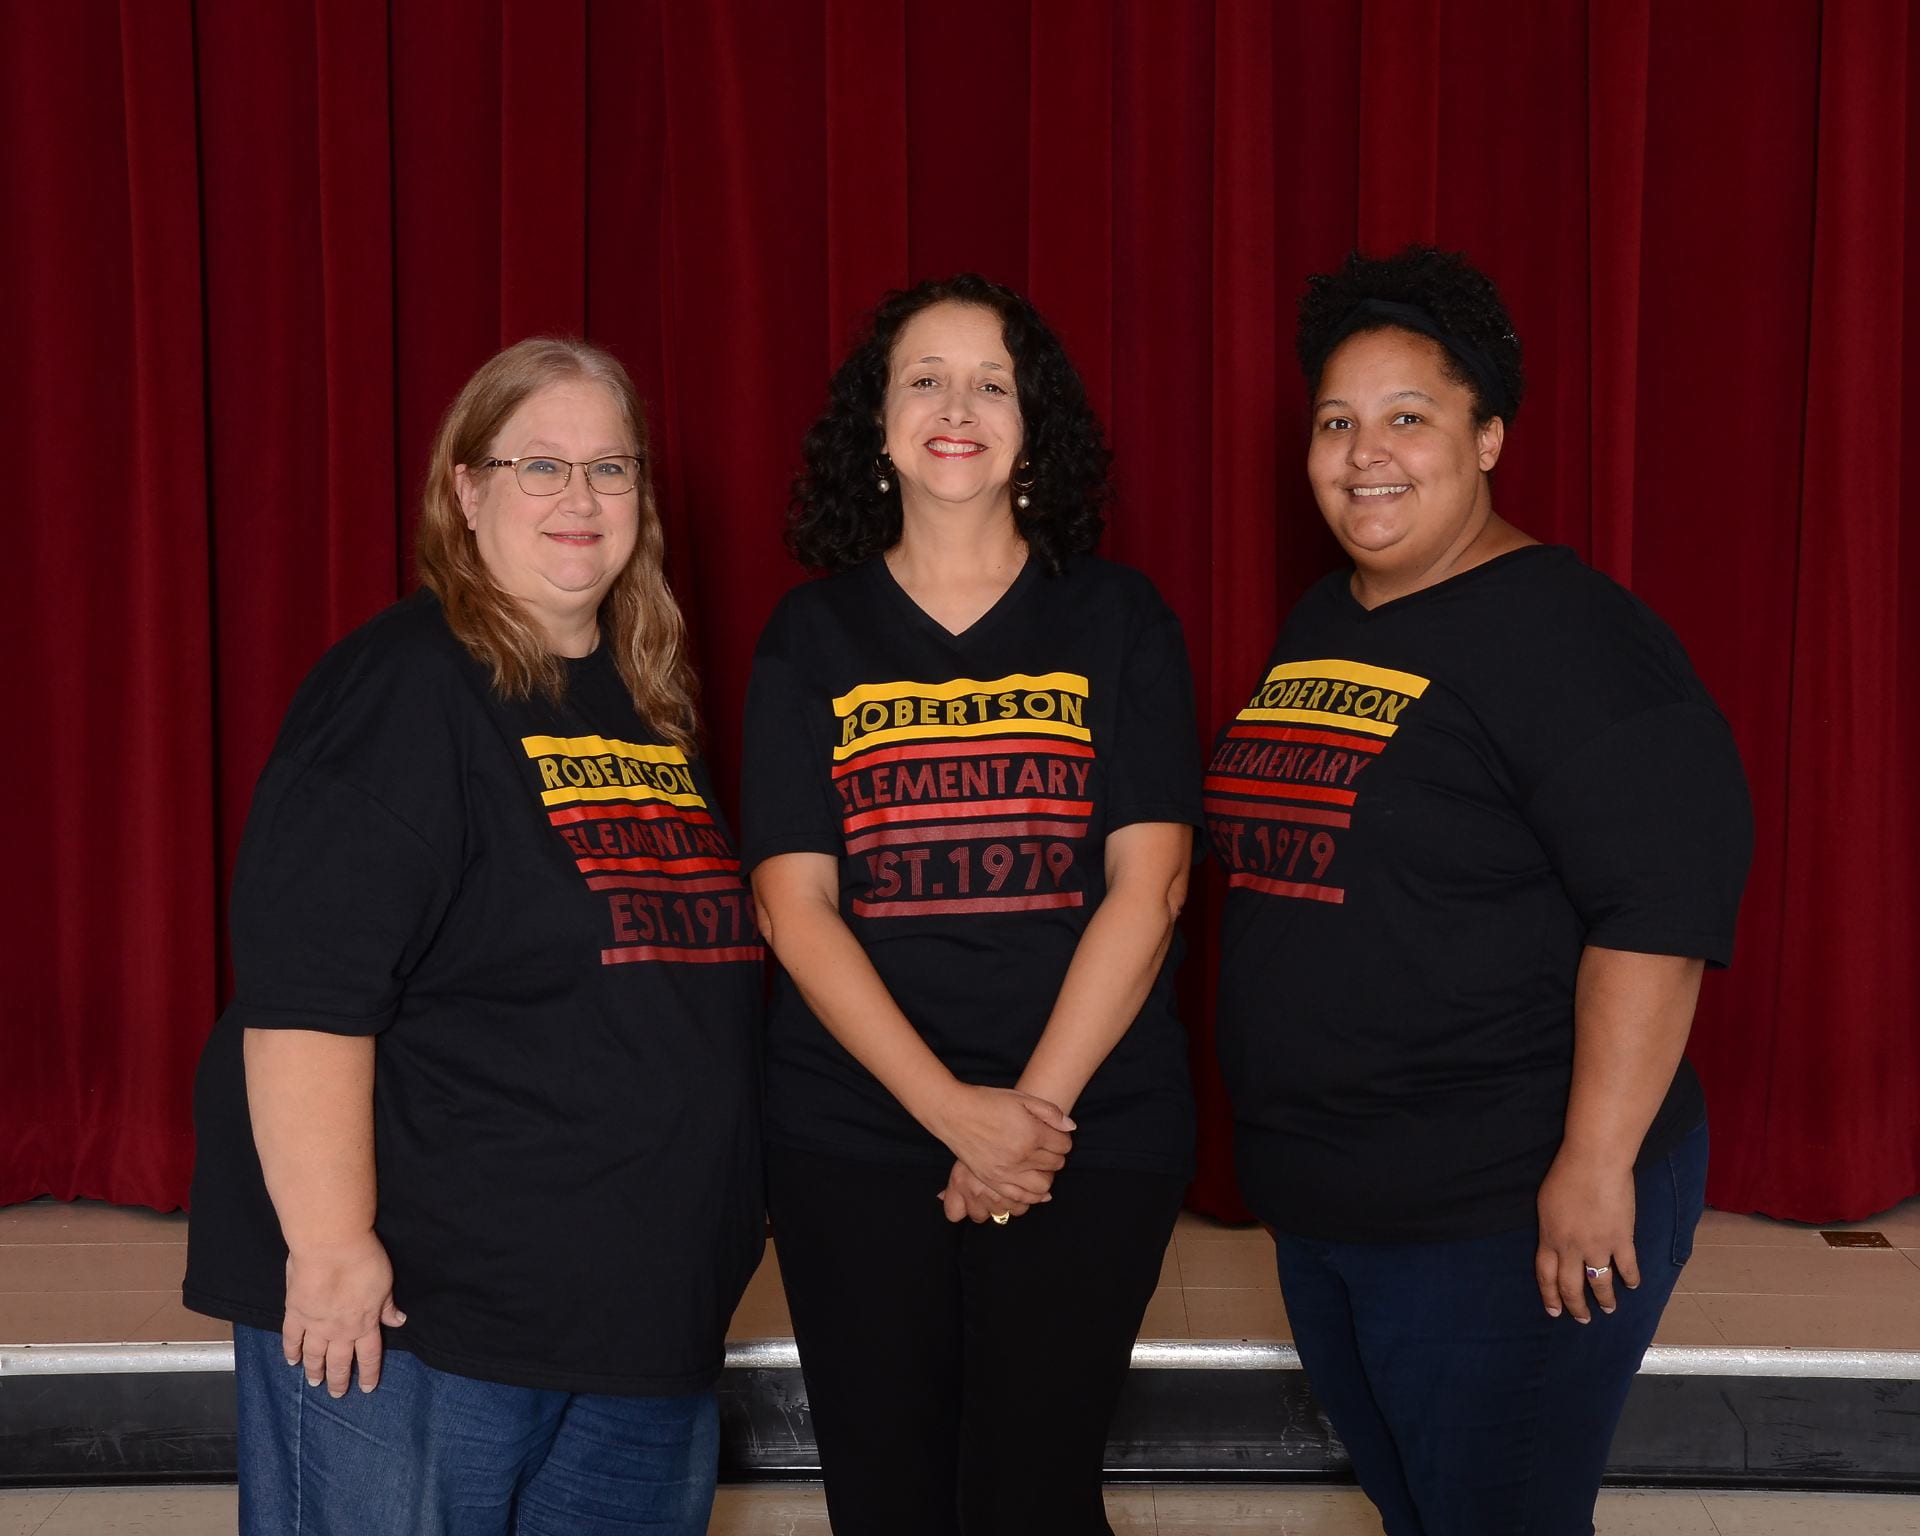 (3) Second grade team teachers wearing school shirts, standing in front of a maroon stage curtain